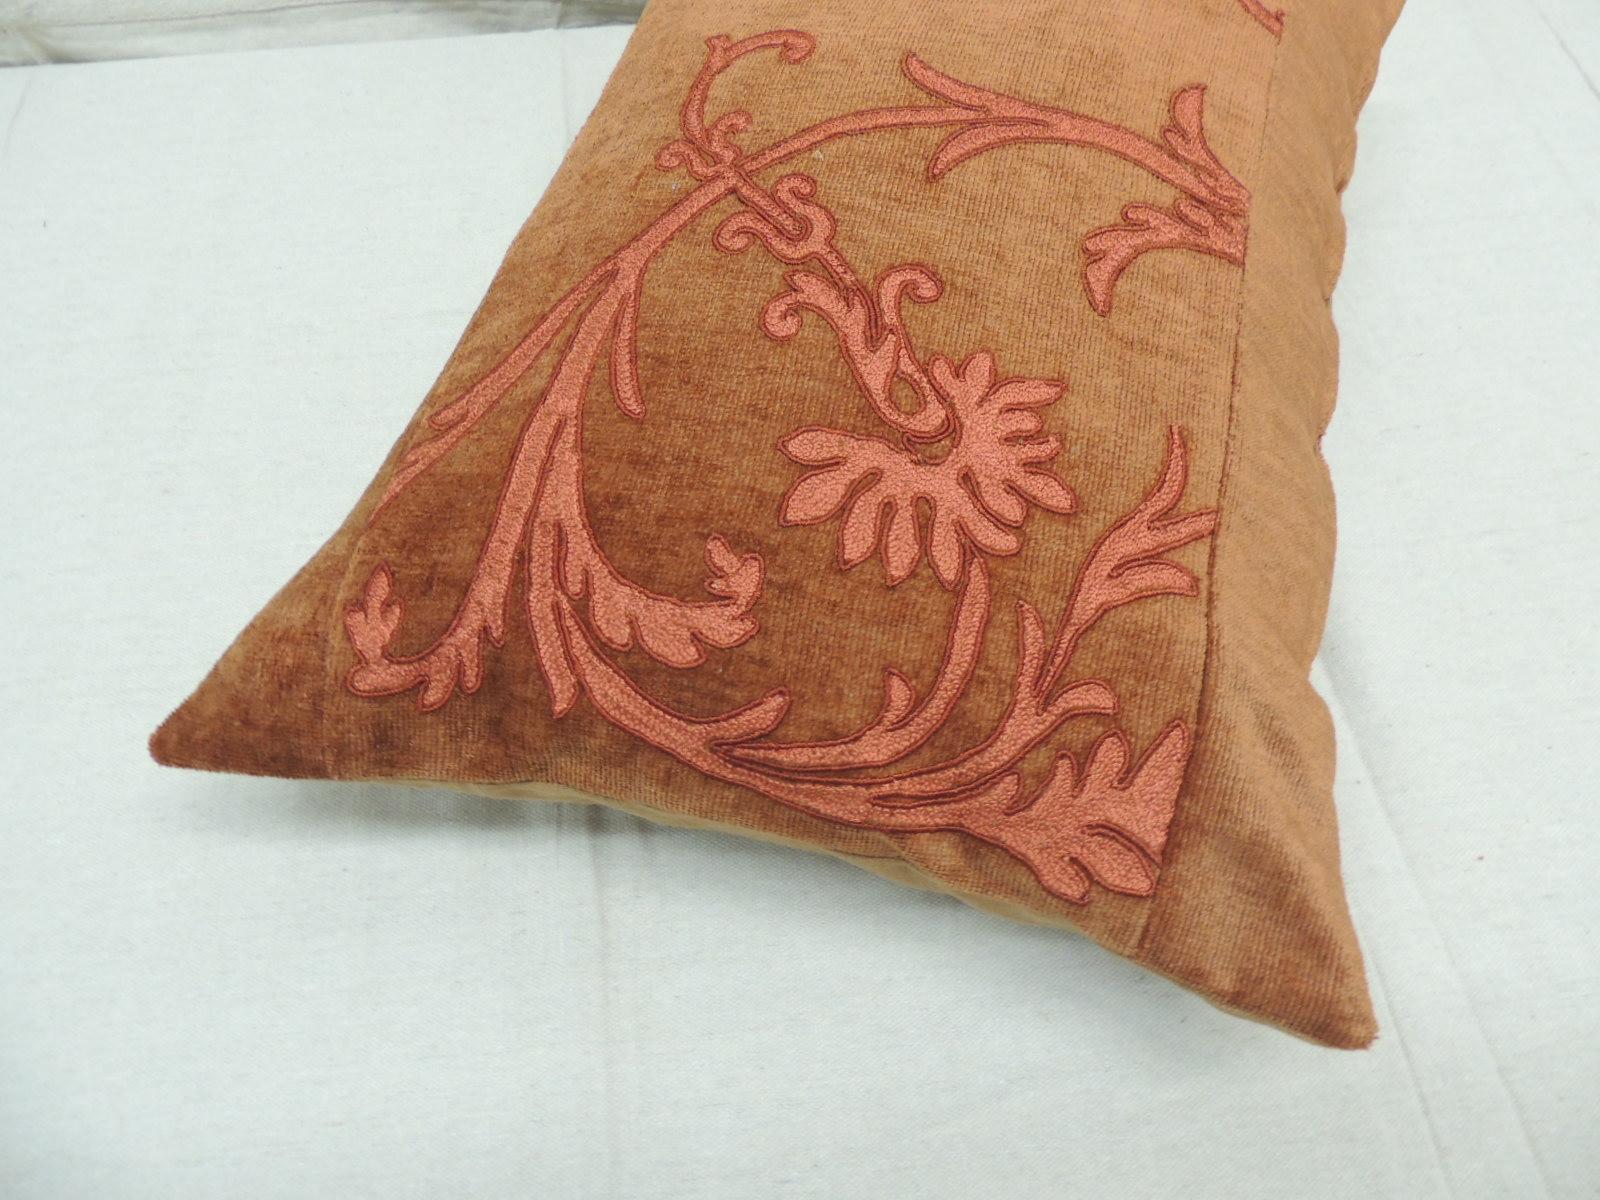 Indian Vintage Orange and Brown Embroidery Bolster Decorative Pillow